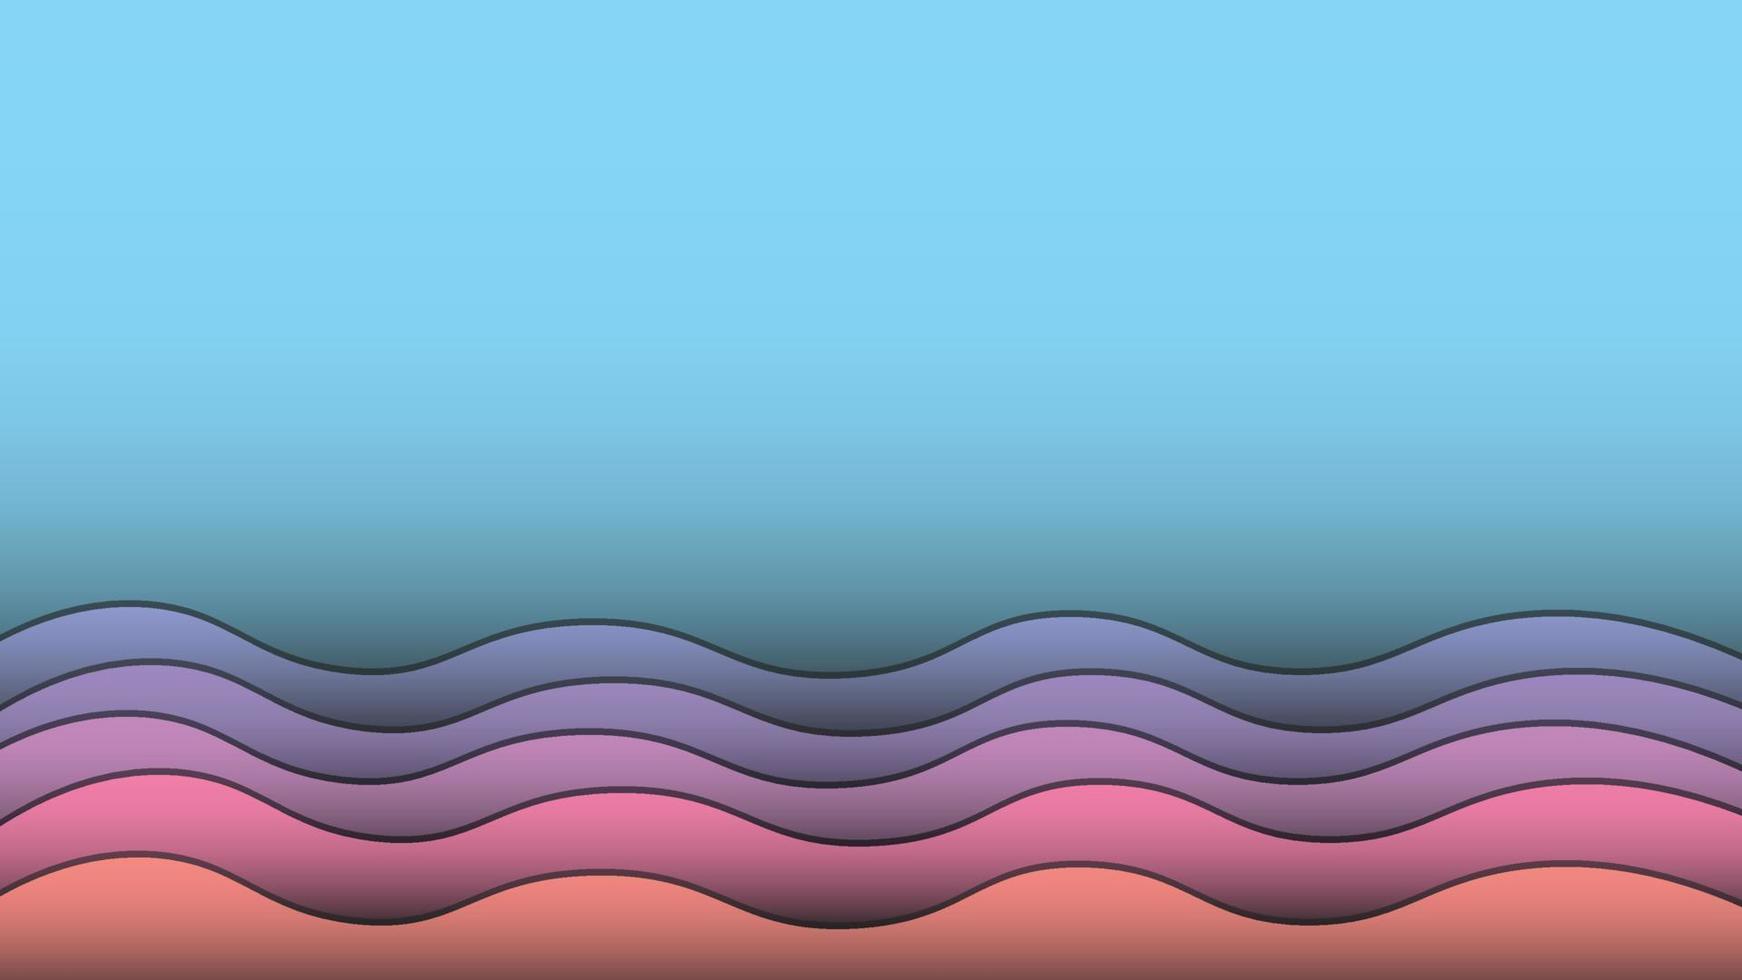 Colorful Abstract wavy background free vector